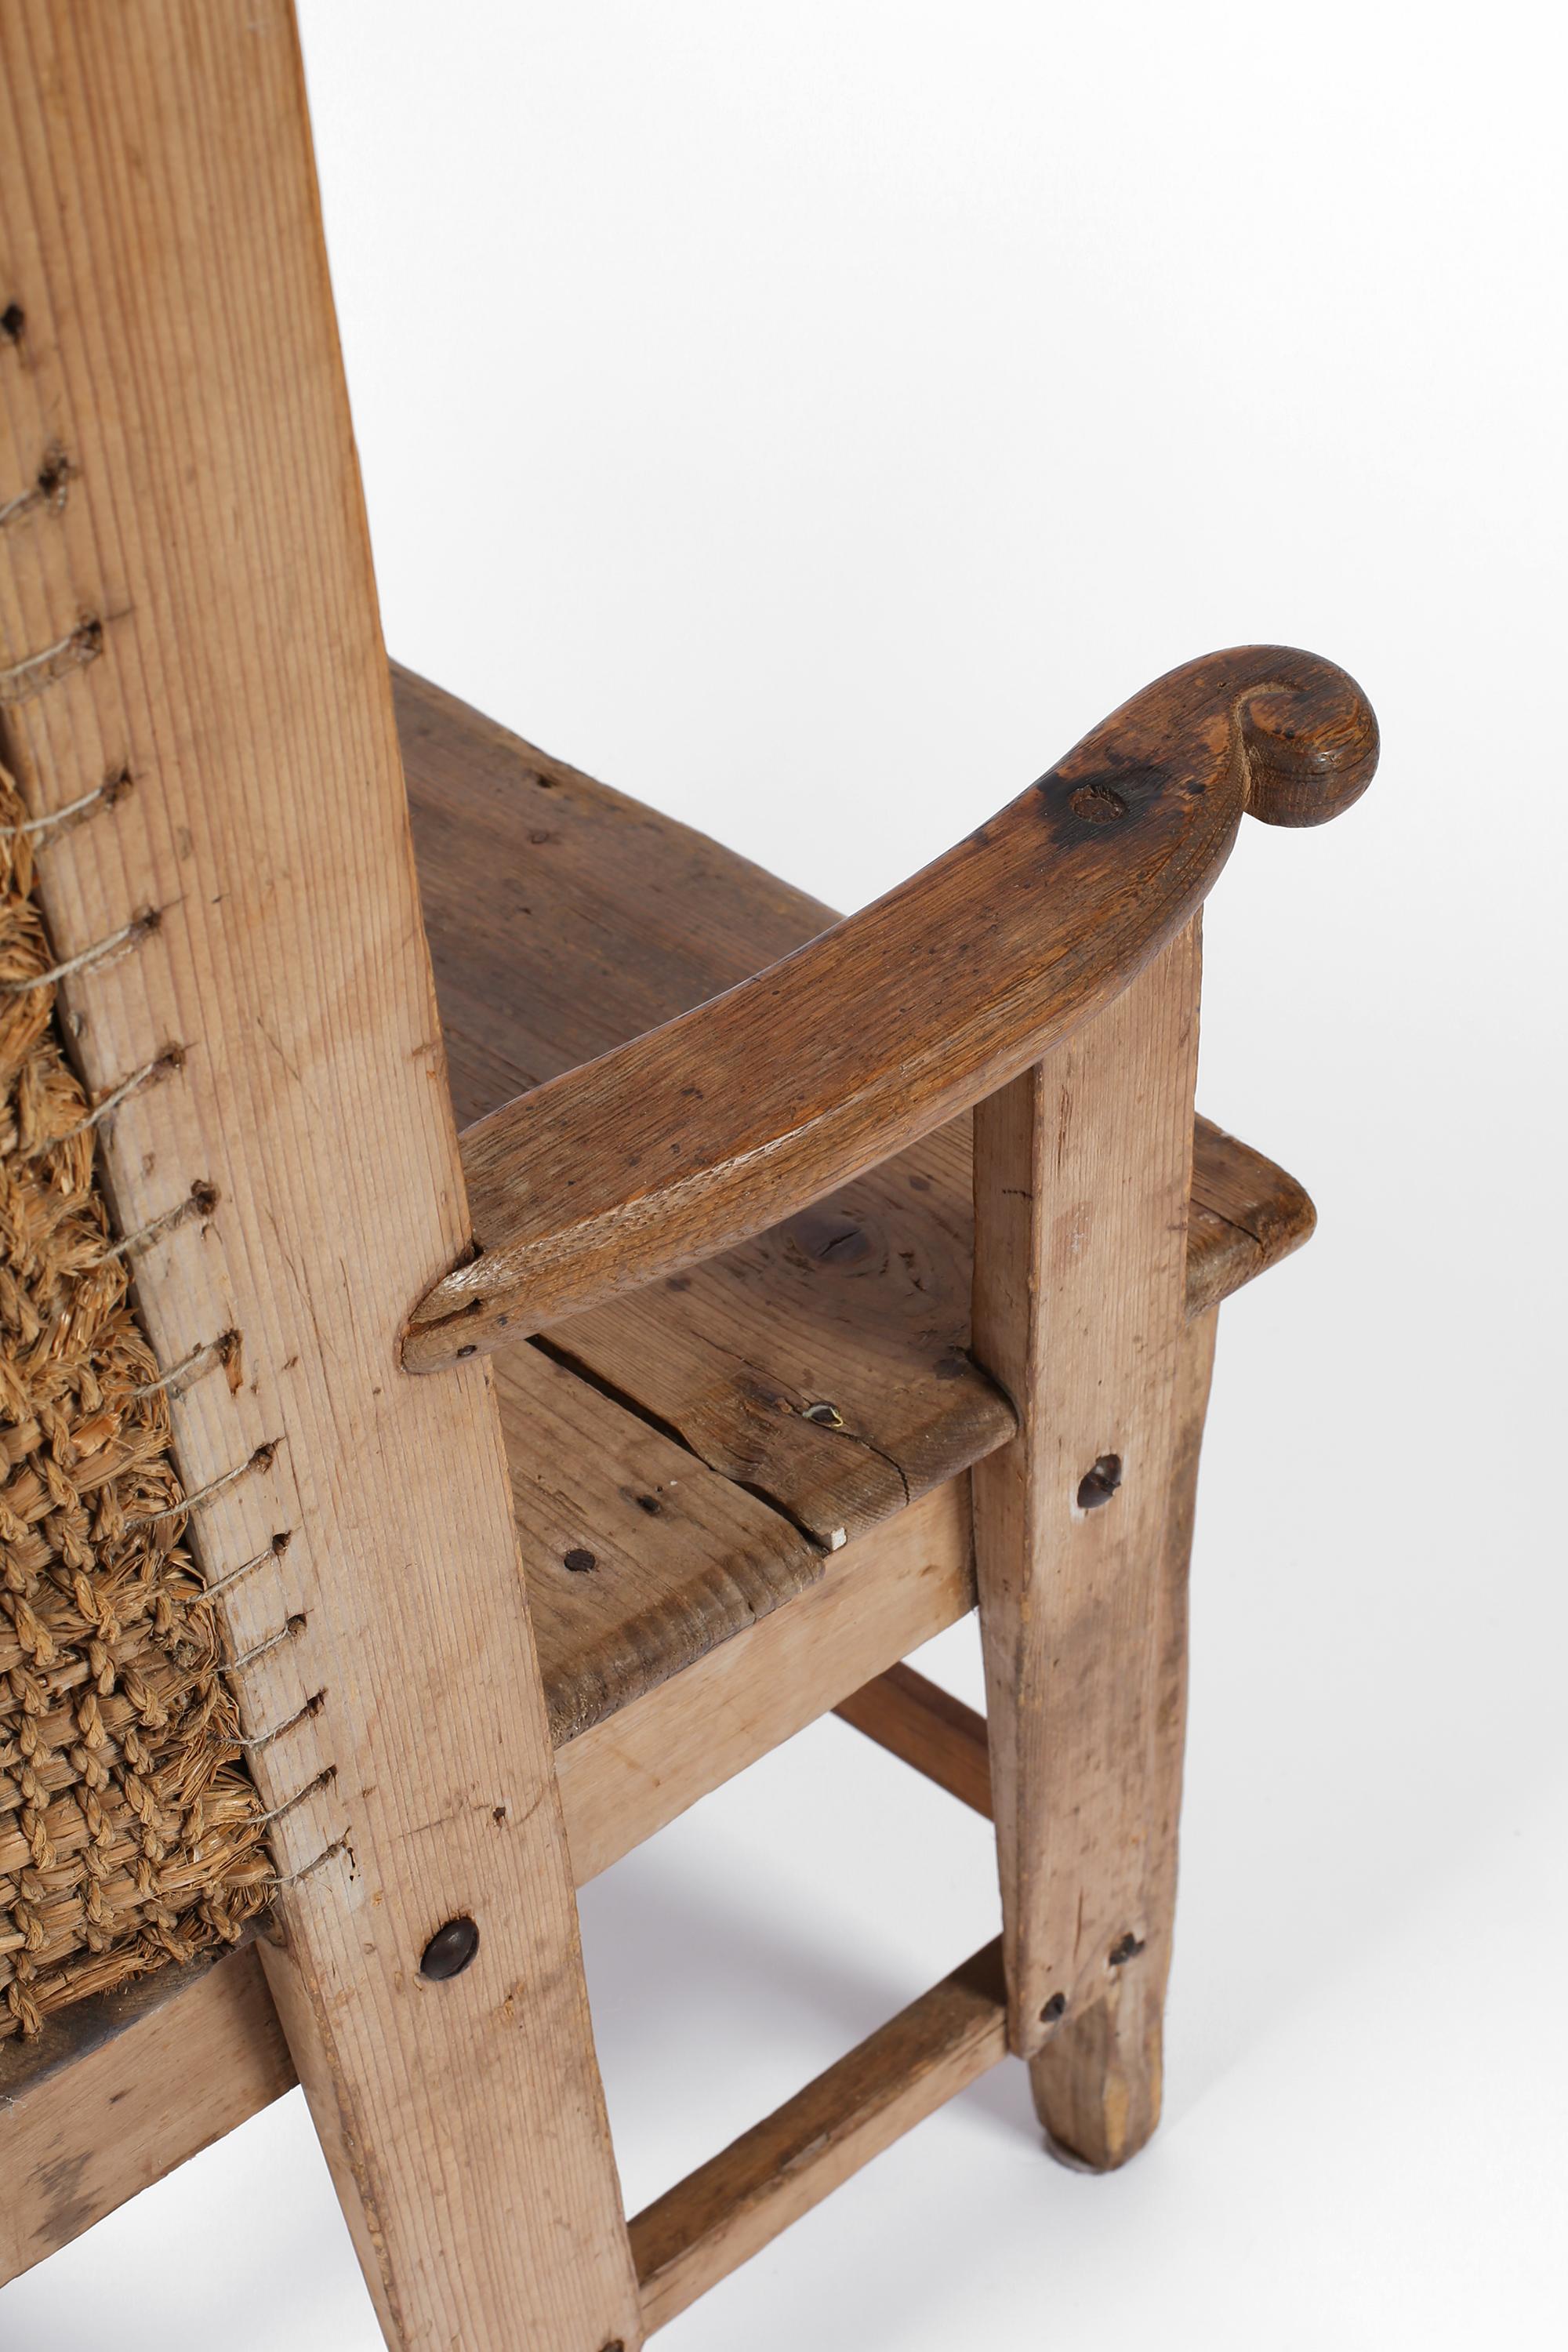 Late 19th Century Scottish Vernacular Pine and Woven Straw Orkney Chair 14